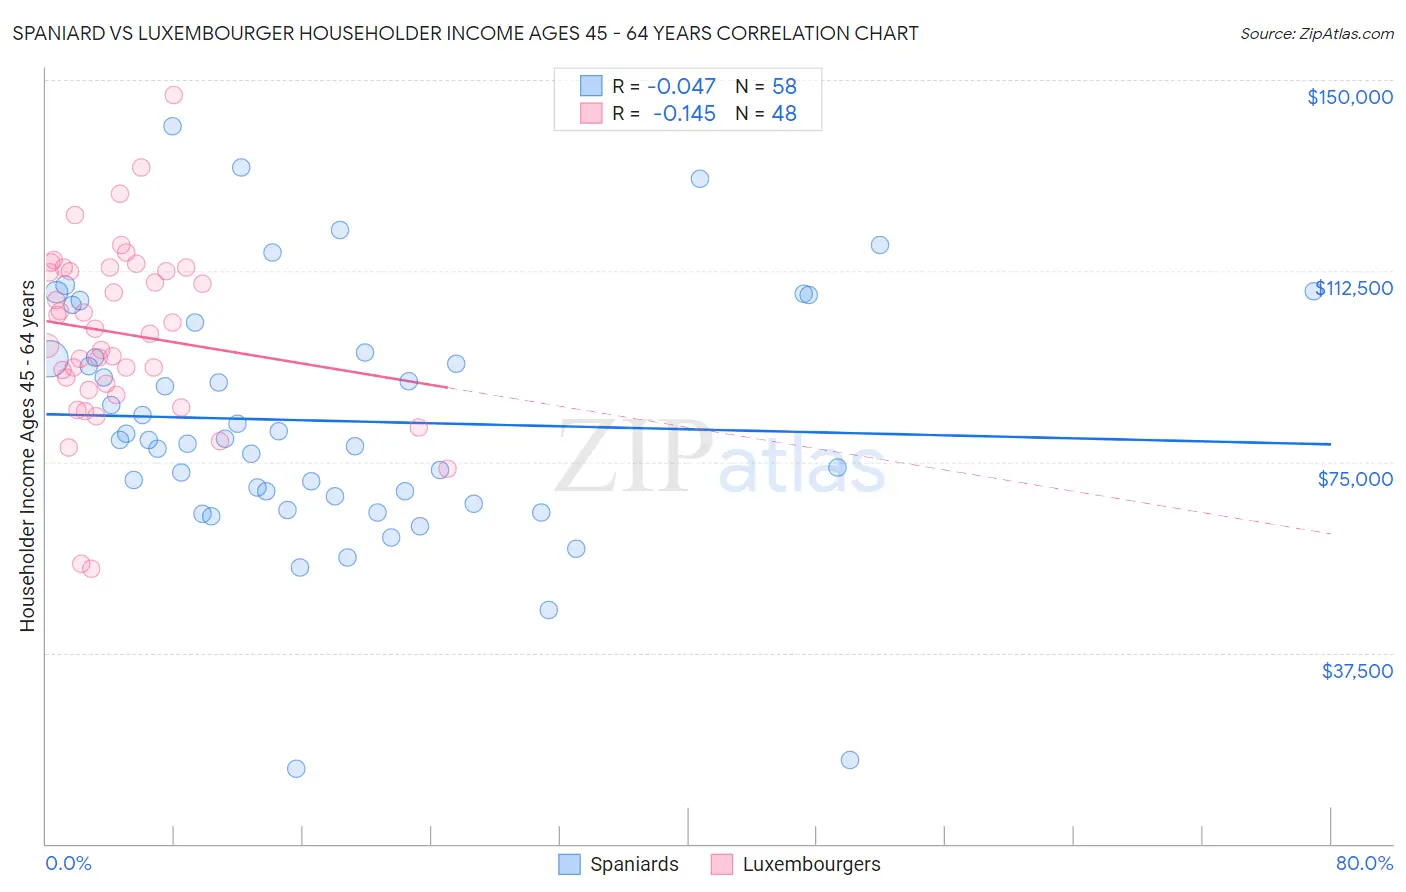 Spaniard vs Luxembourger Householder Income Ages 45 - 64 years